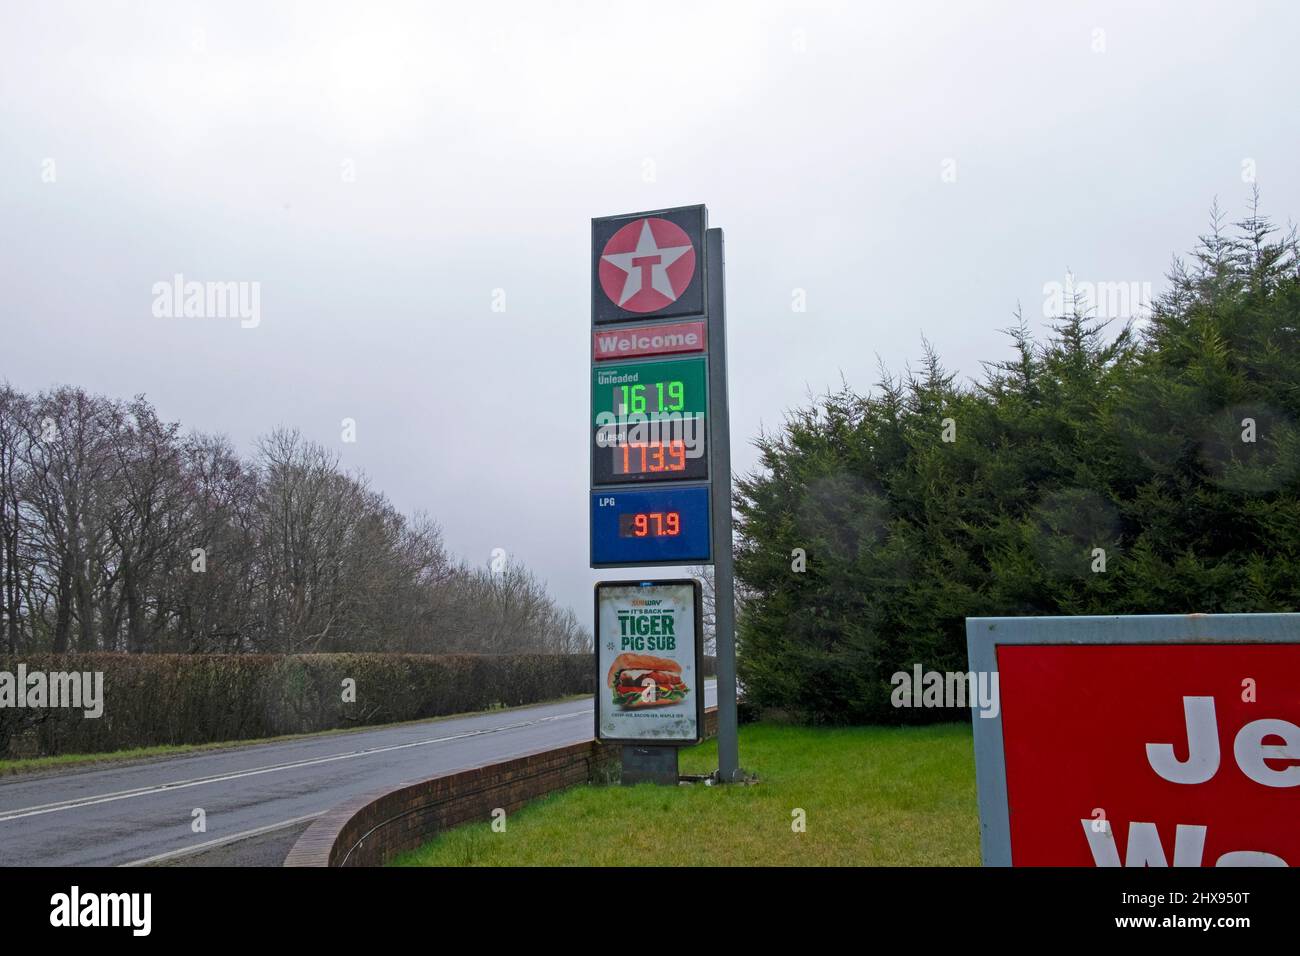 Petrol prices on Texaco station sign Unleaded 161.9 per litre diesel 173.9 per litre on 10 March 2022 in Carmarthenshire Wales UK  KATHY DEWITT Stock Photo